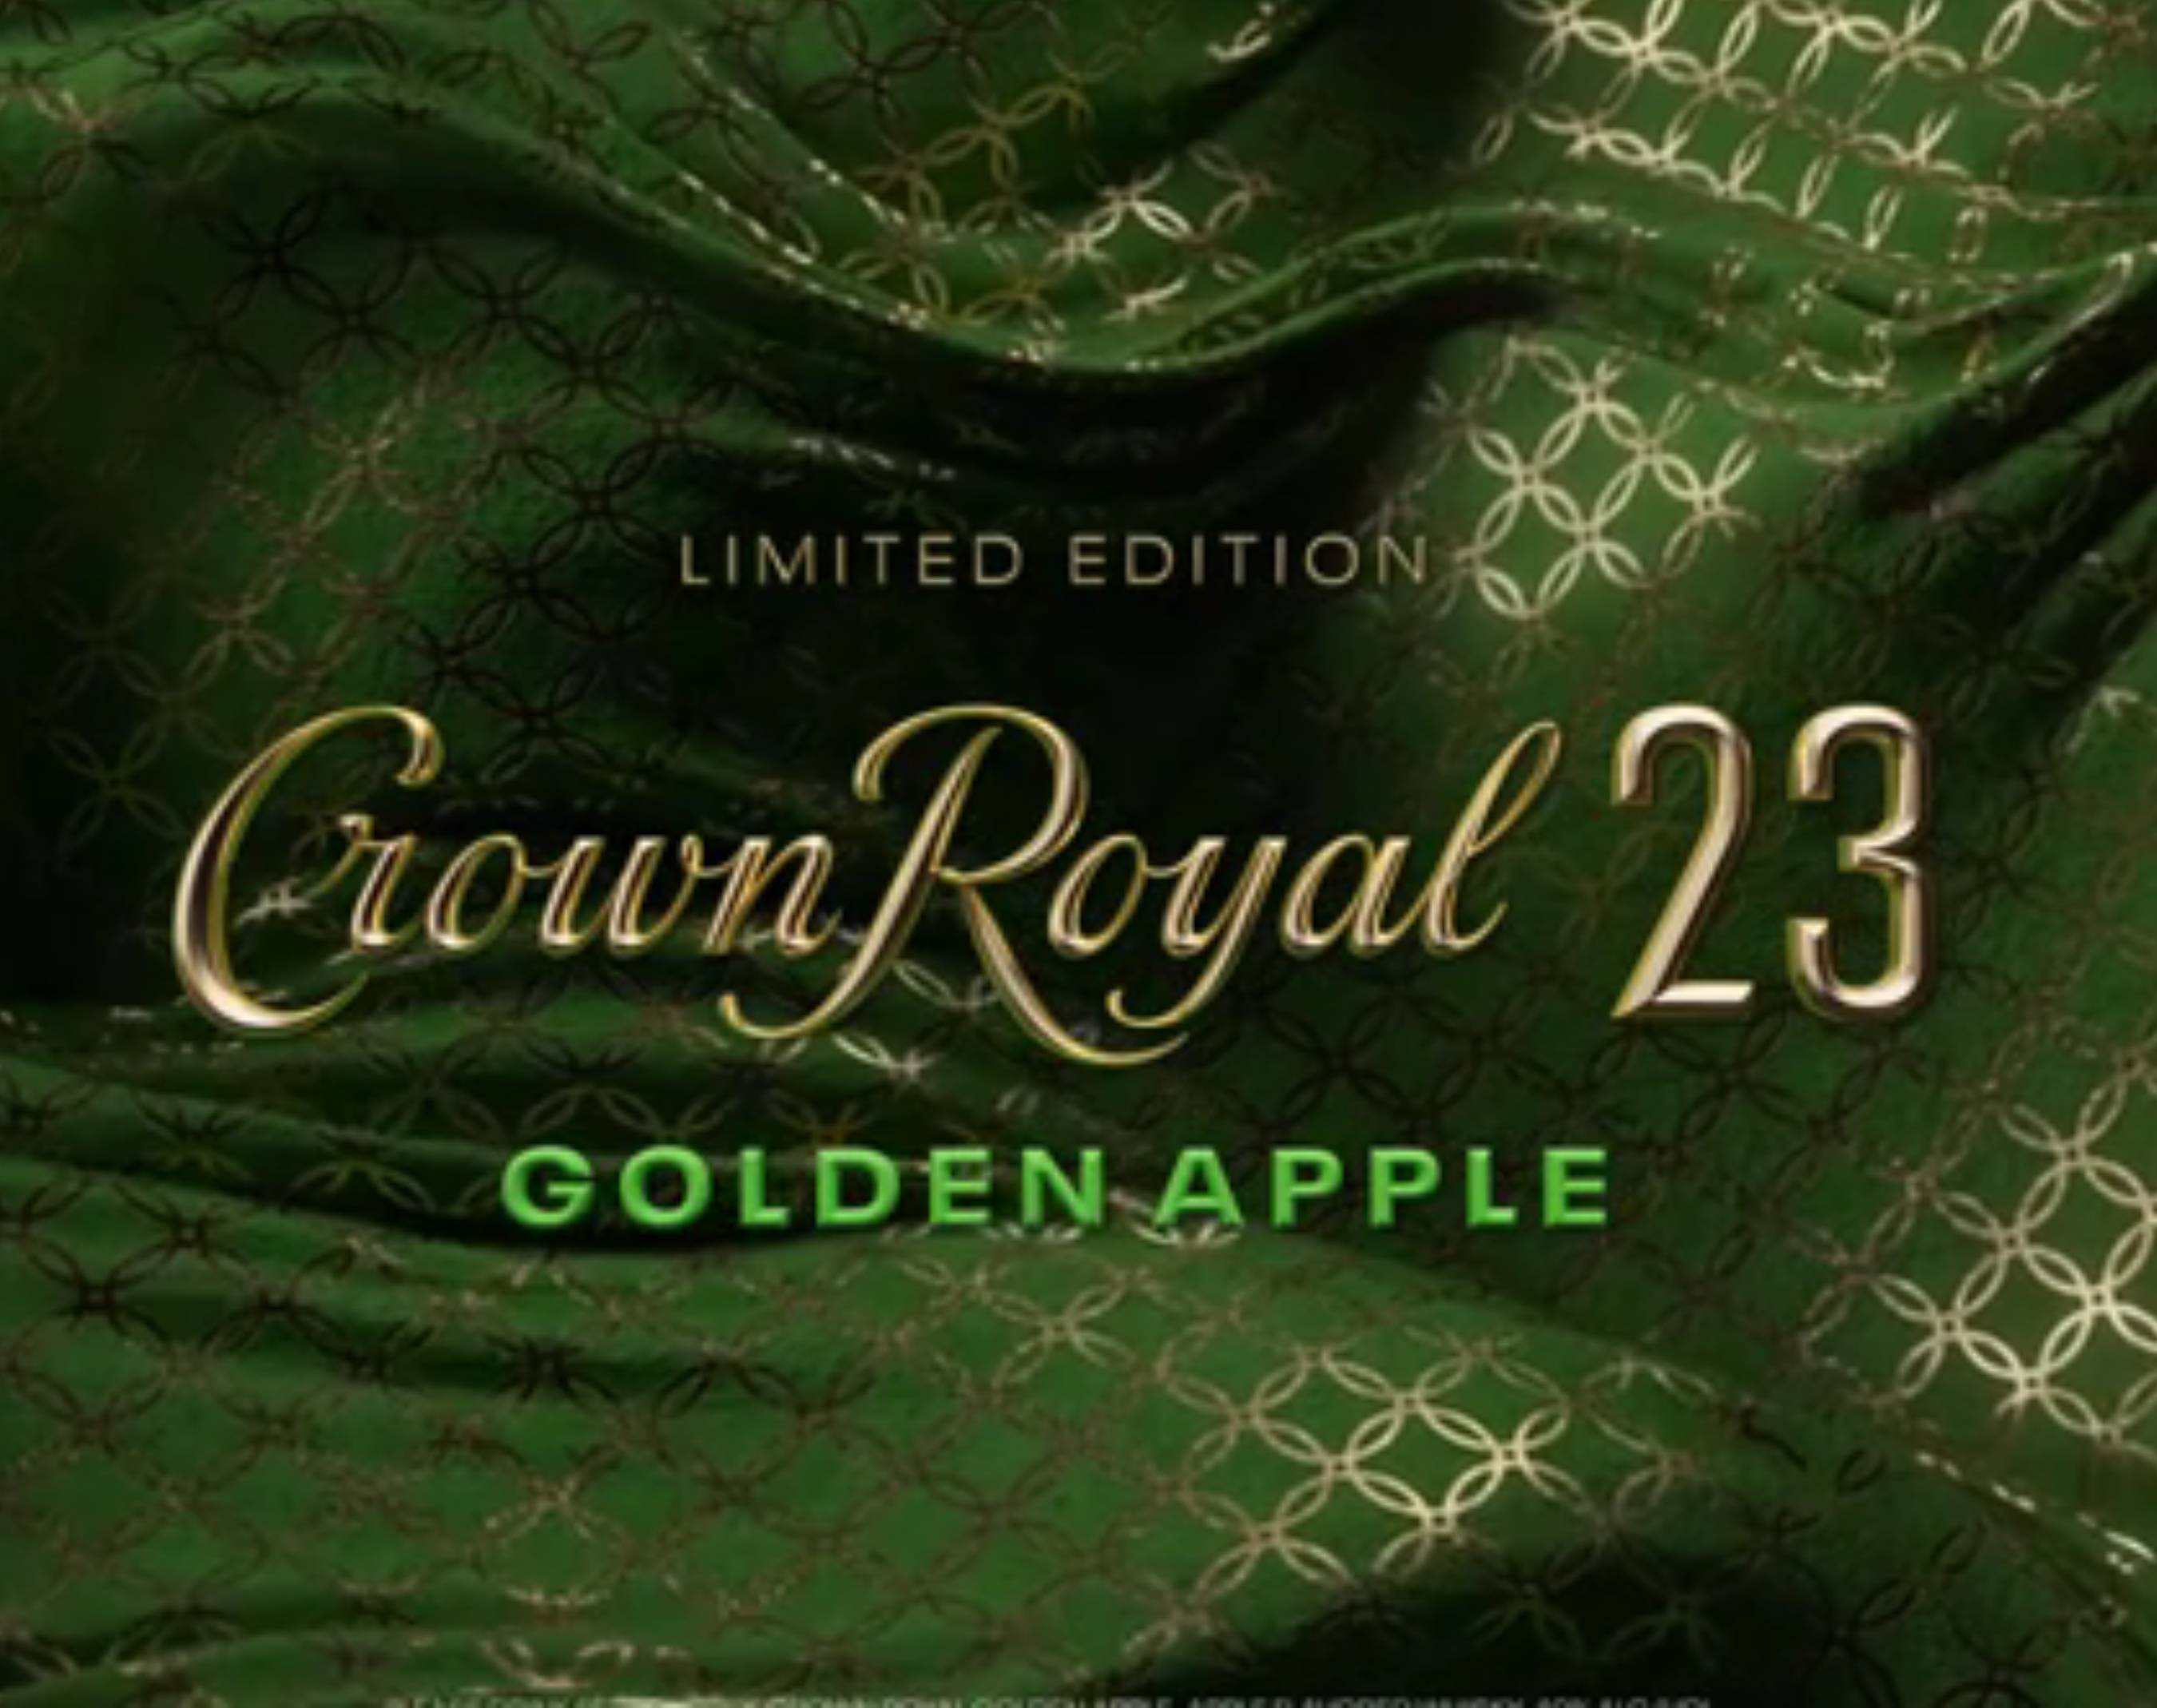 Play Video: Introducing Crown Royal Golden Apple Aged 23 Years